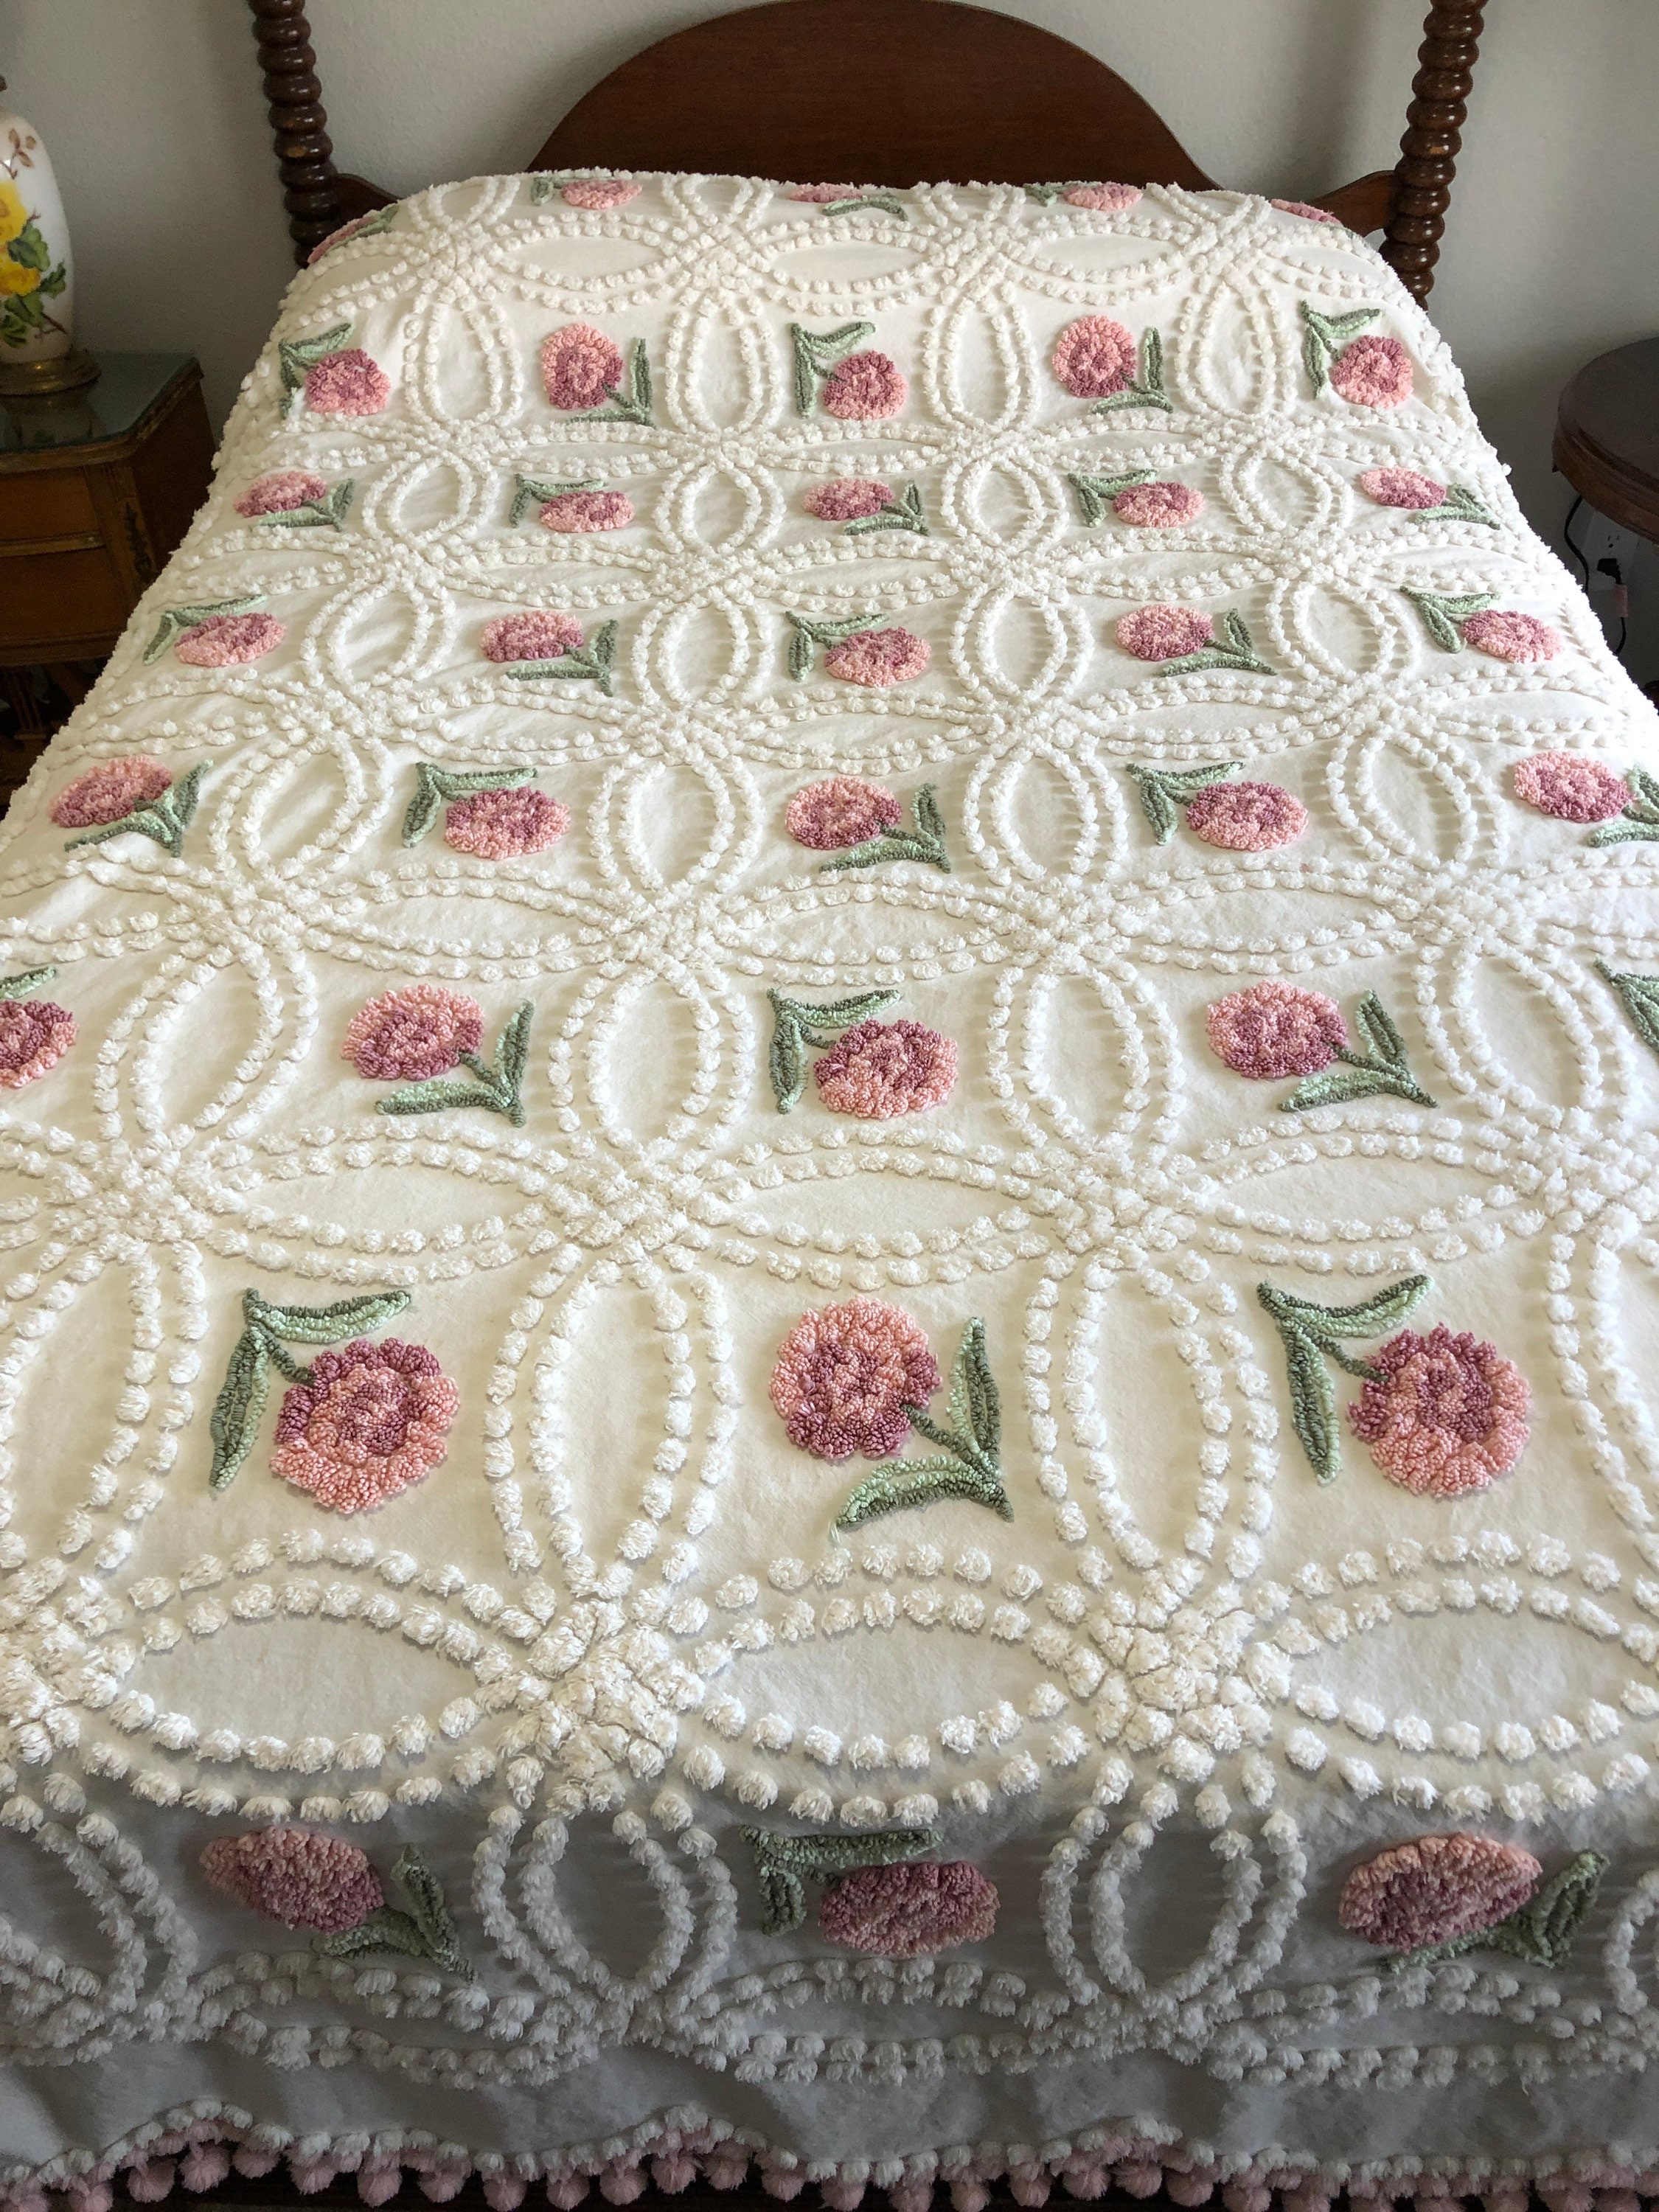 Unimall Superking Bedspreads Quilted 3 Piece Vintage American Style Floral 100% Cotton Patchwork Bedspread Super King Size 240x260 cm with 2 Pillowcases 50x70cm 